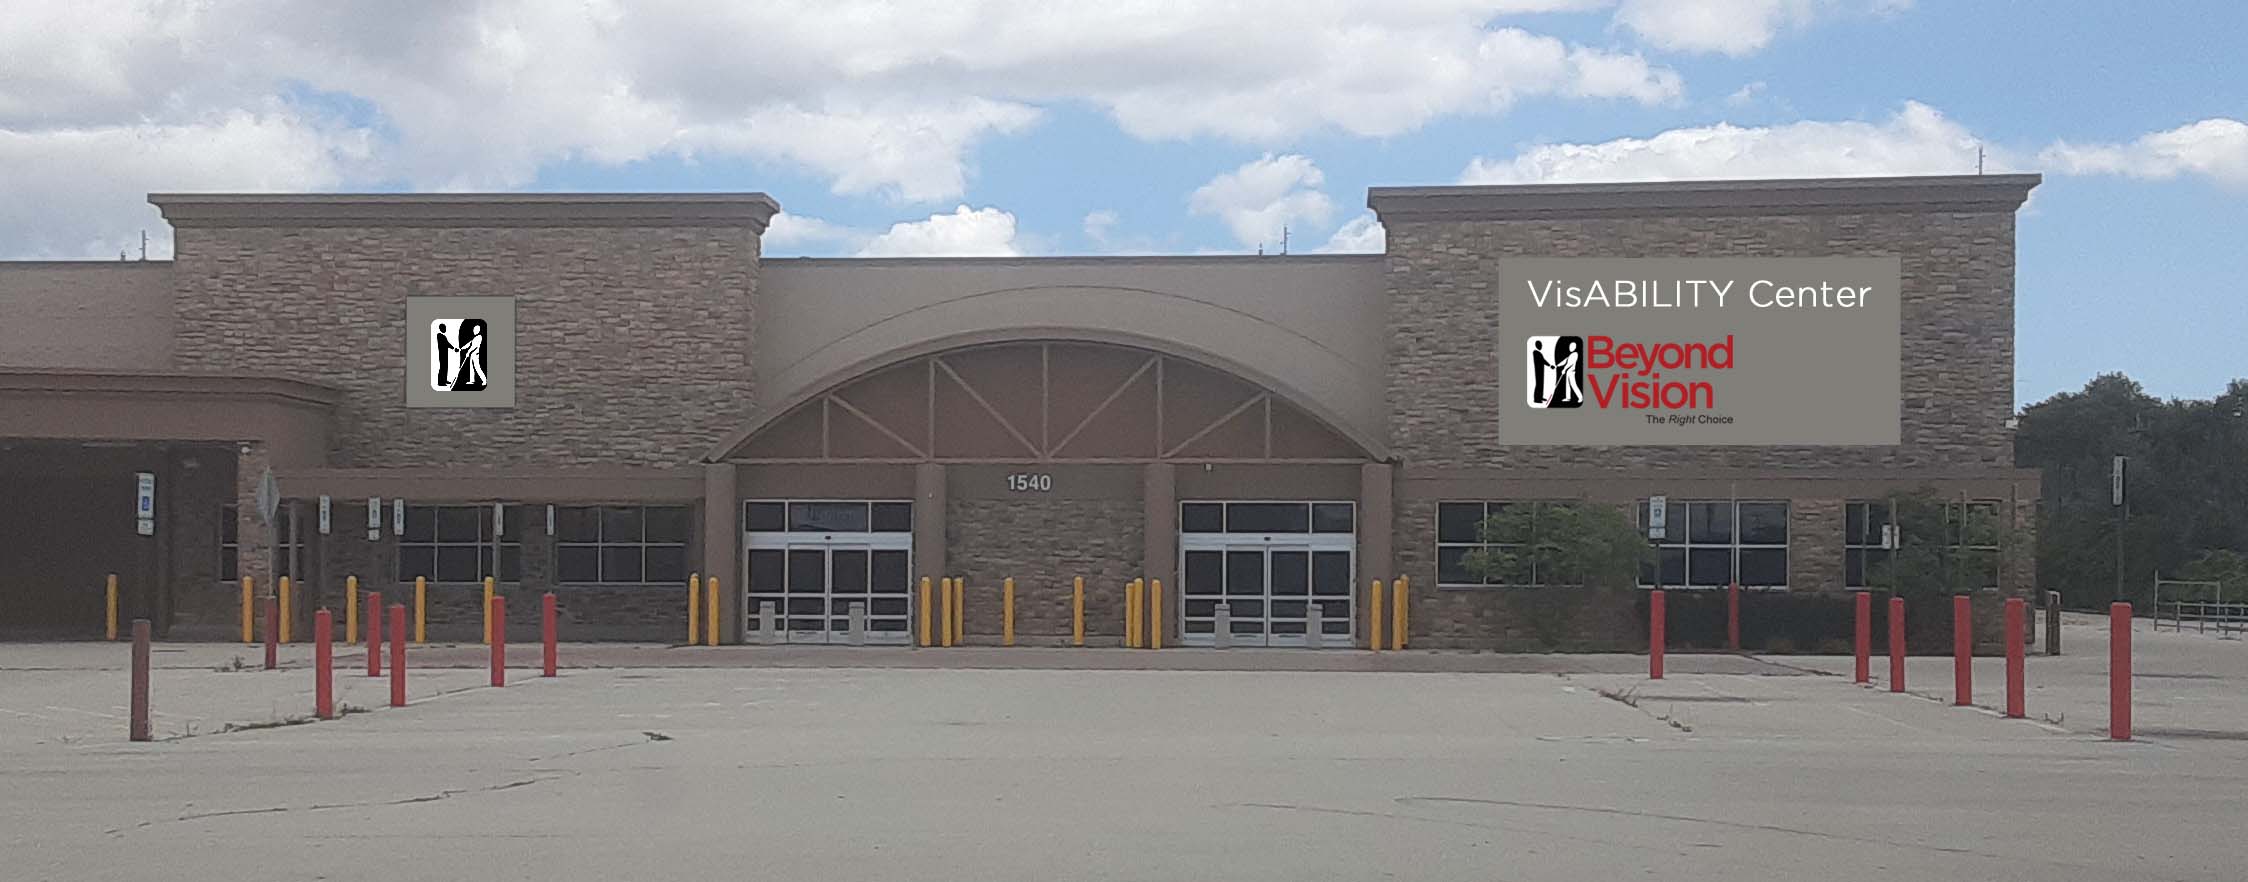 the front of the former Sam's Club with Beyond Vision logos photoshopped onto it